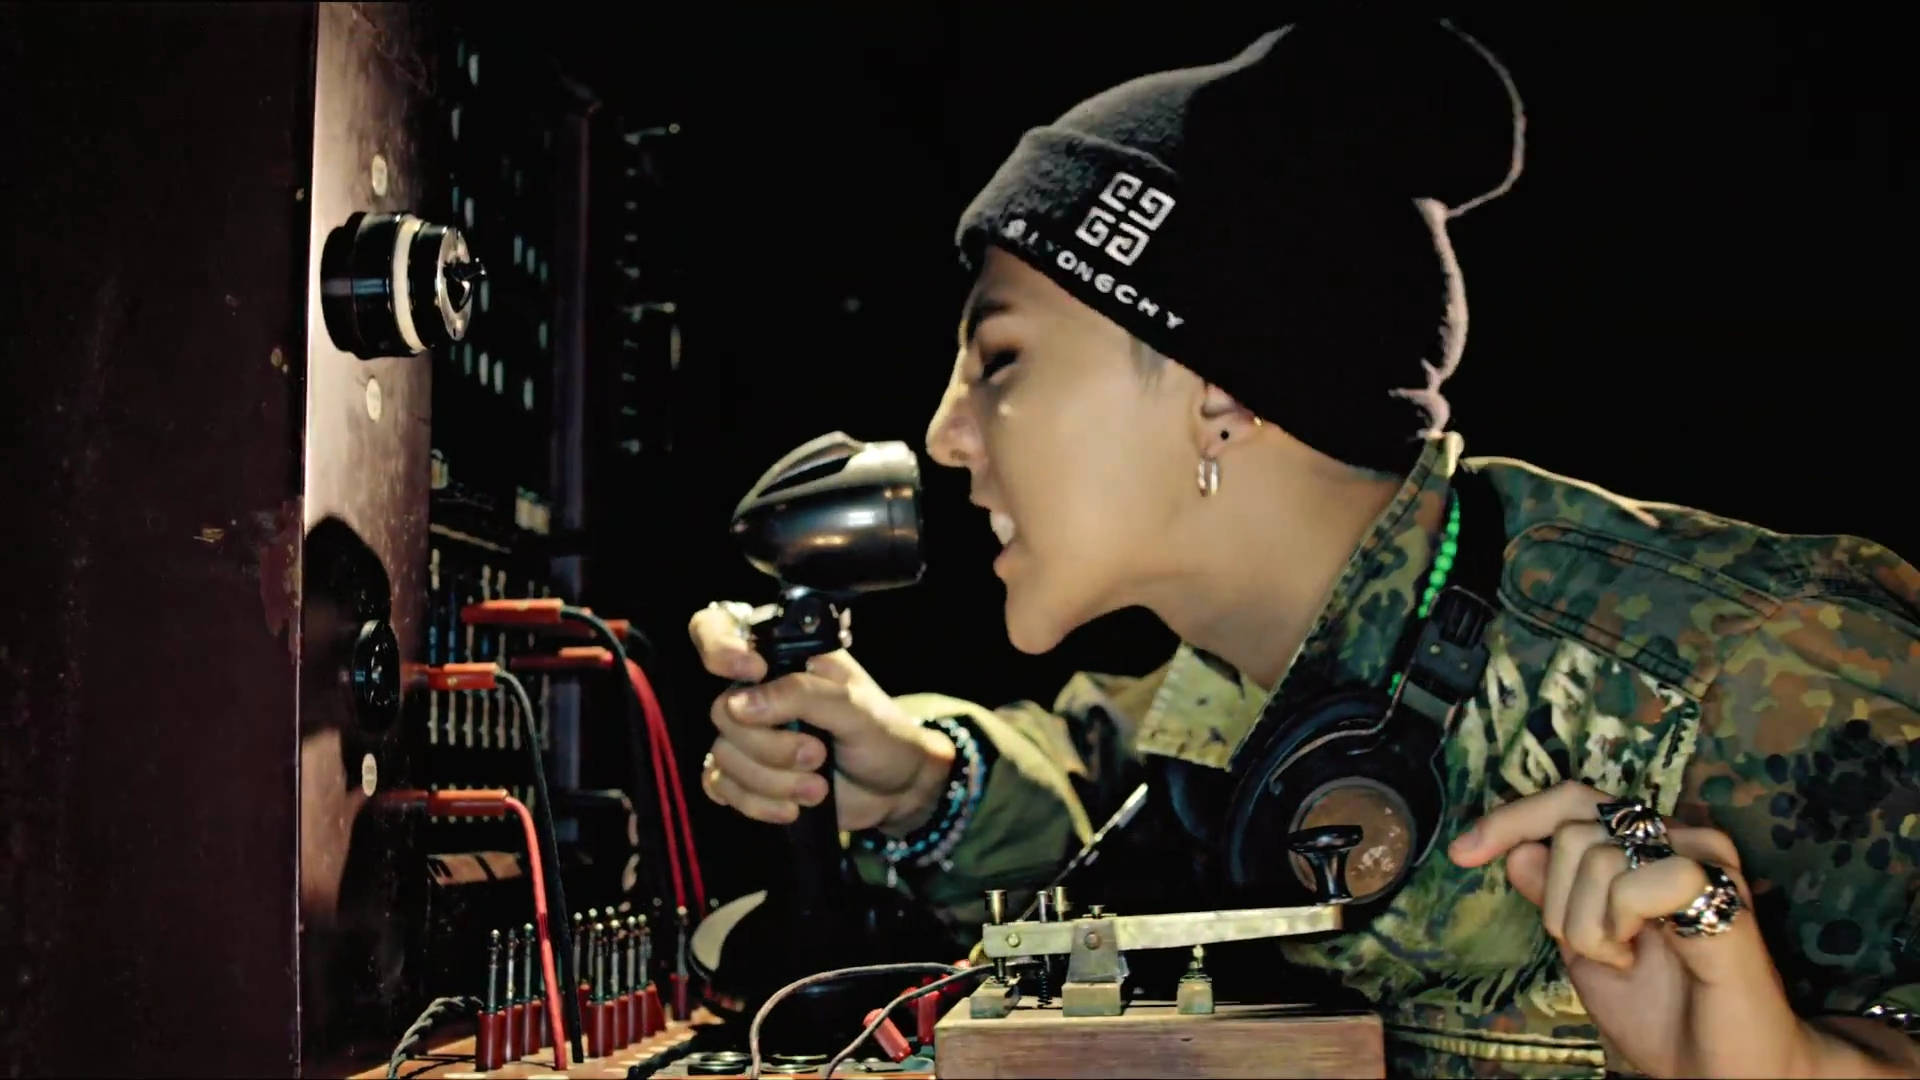 G-dragon With Beanie Wallpaper